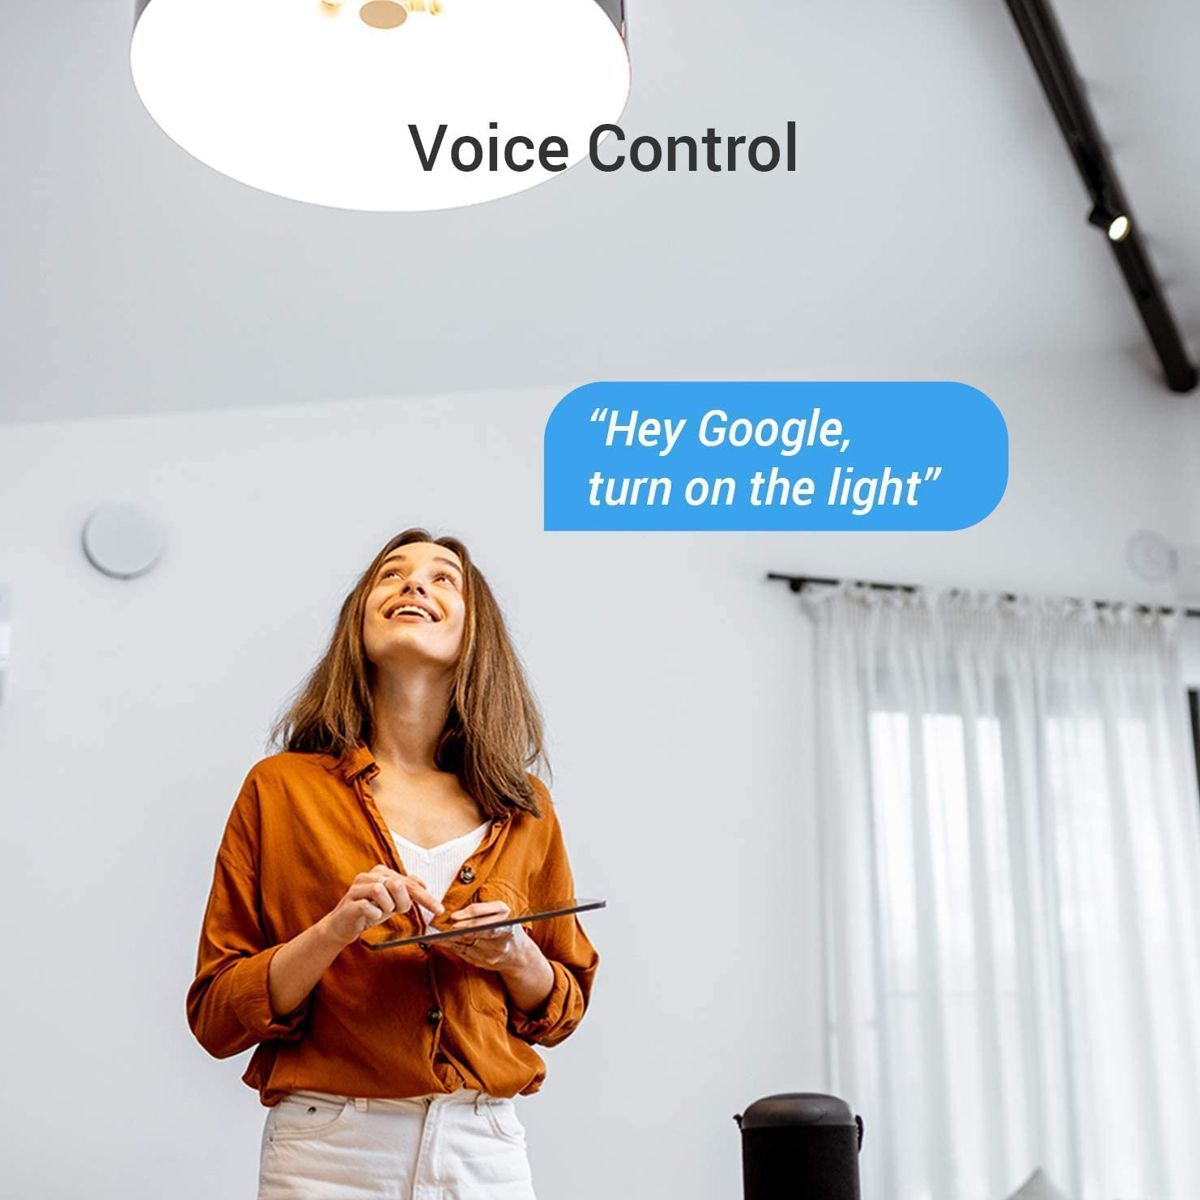 Voice control lights function with a simple voice command transforming the mood of interior lighting